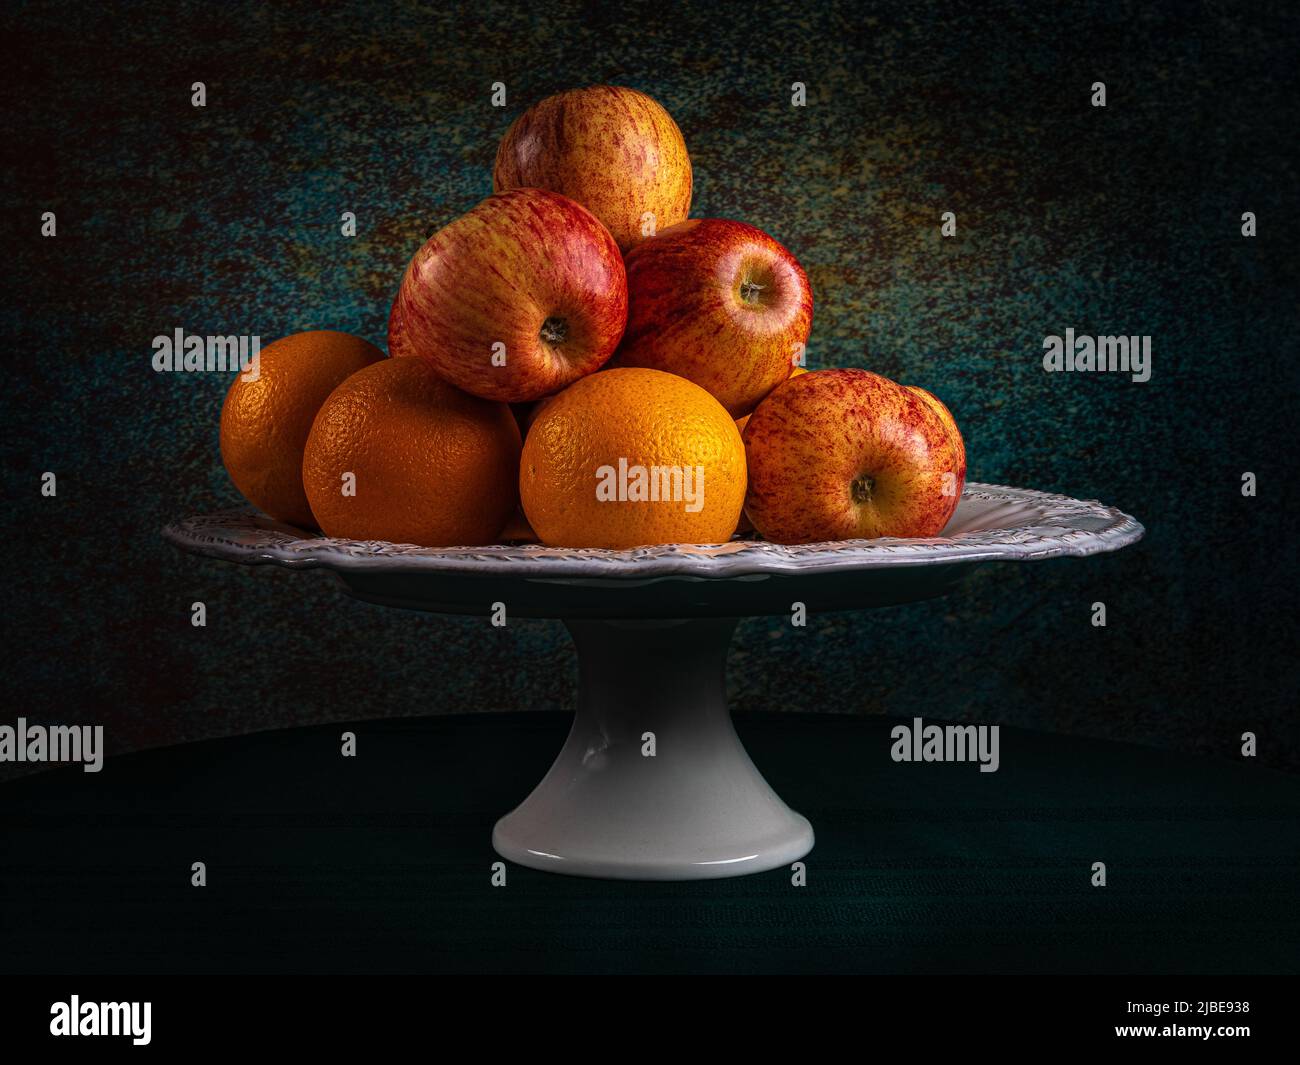 Fruit platter, apples and oranges. Mood, light photo. Still life picture. Stock Photo